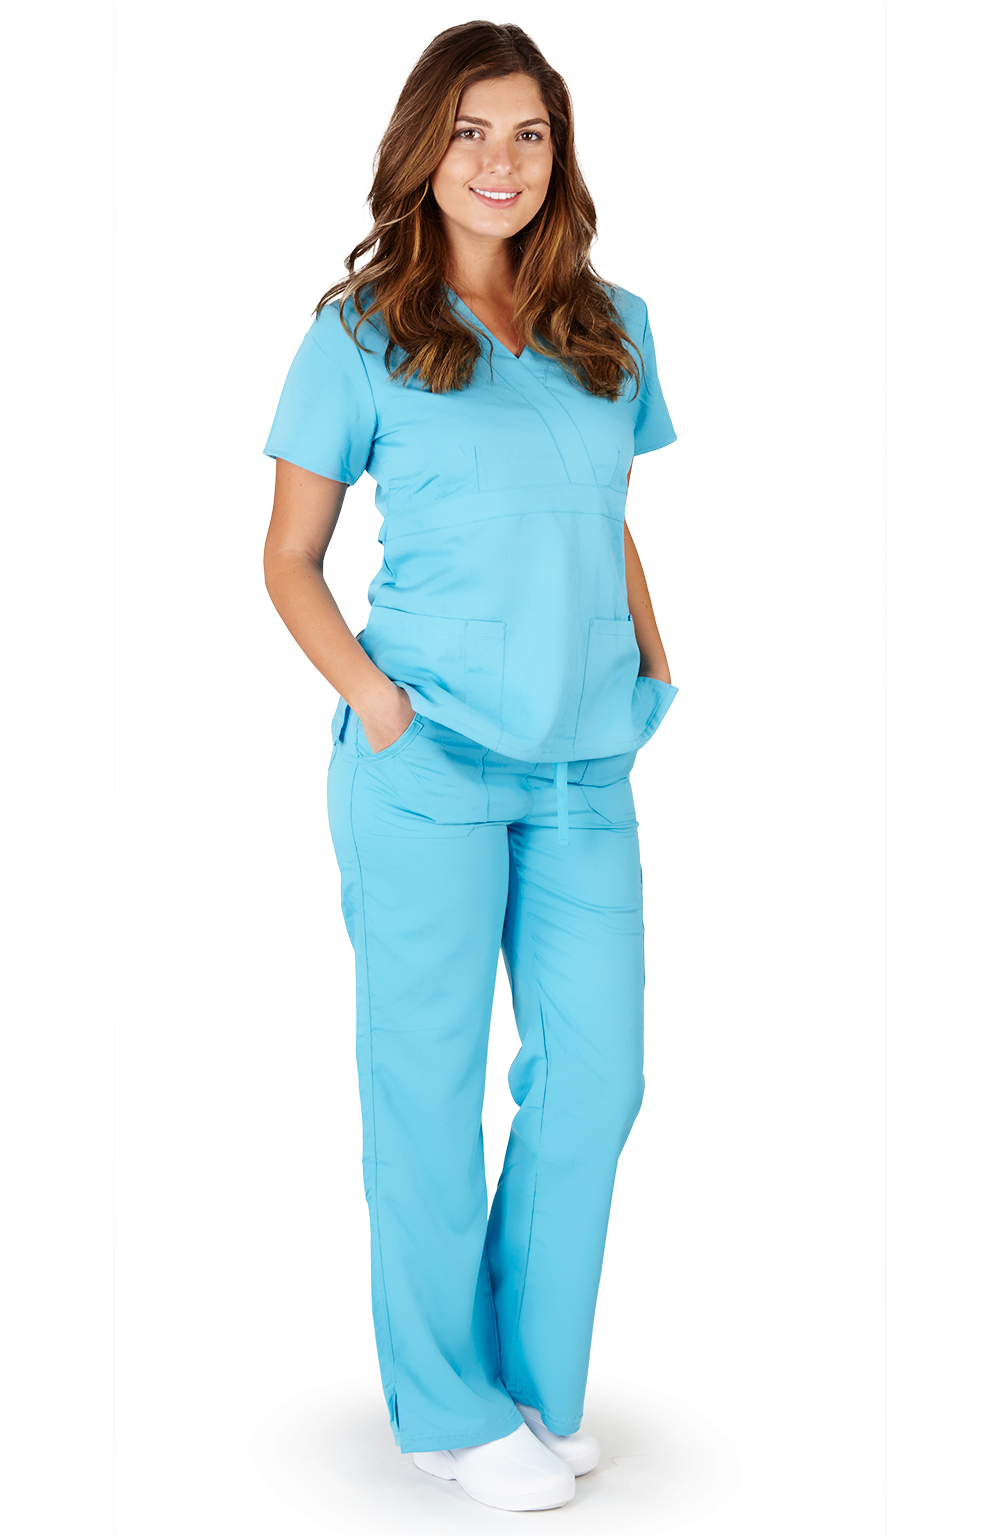 Wholesale Scrubs In Usa Scrubs Are Momentous In Hospital Affordable